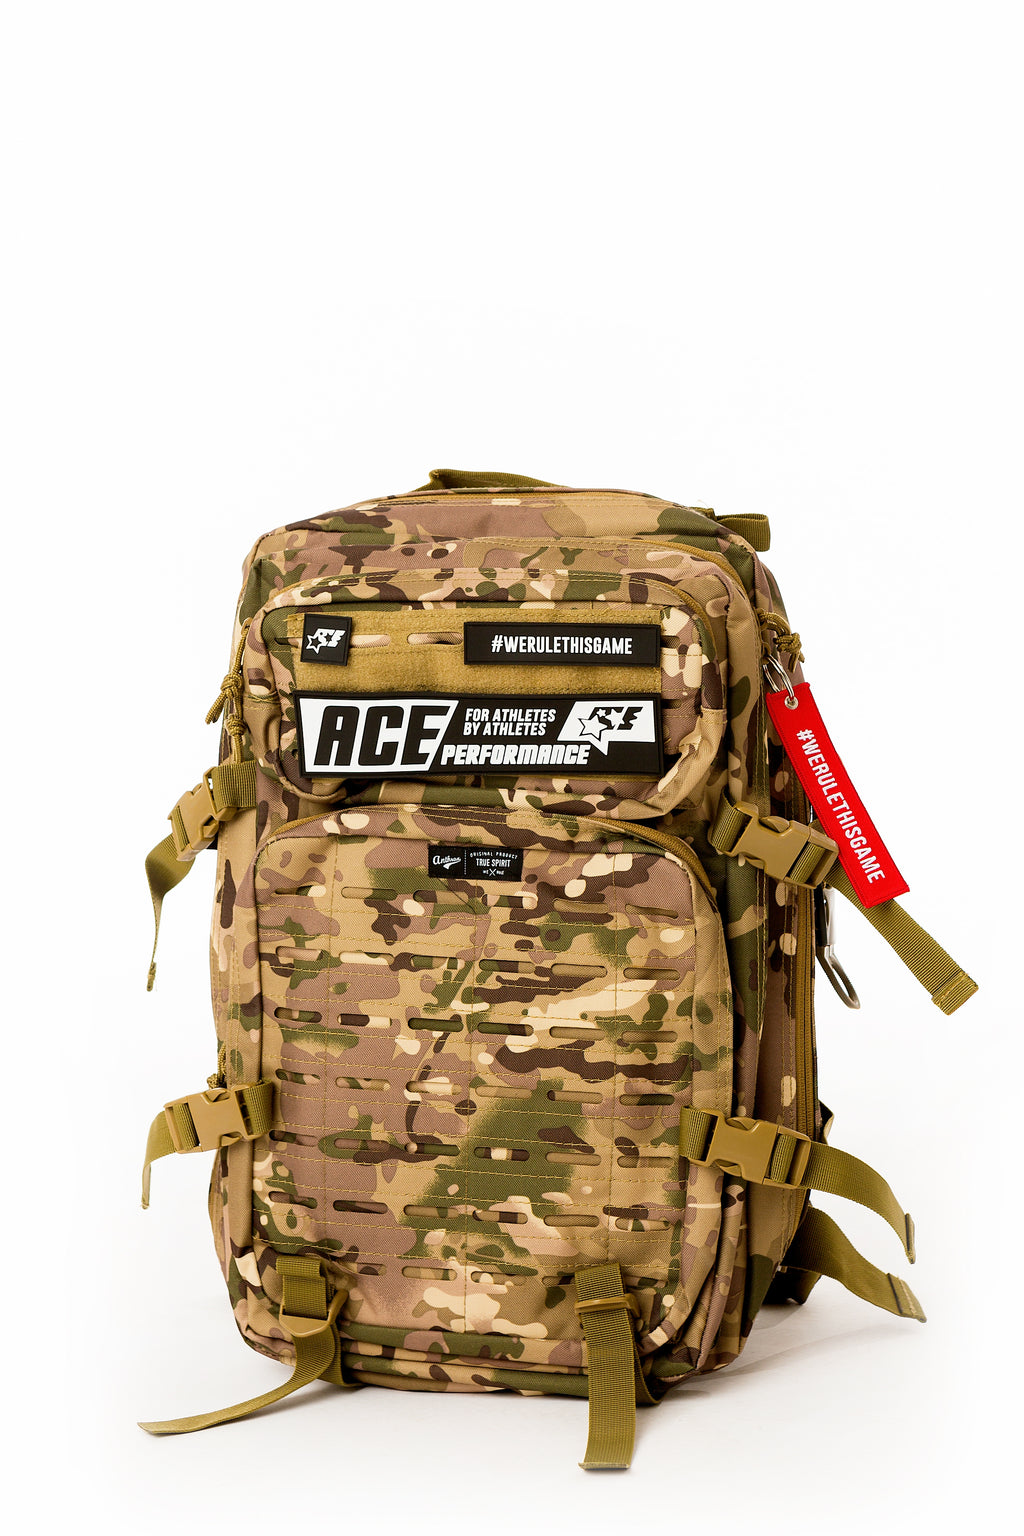 DEPLOYMENT BACK PACK - CAMO - ACEPERFORMANCE